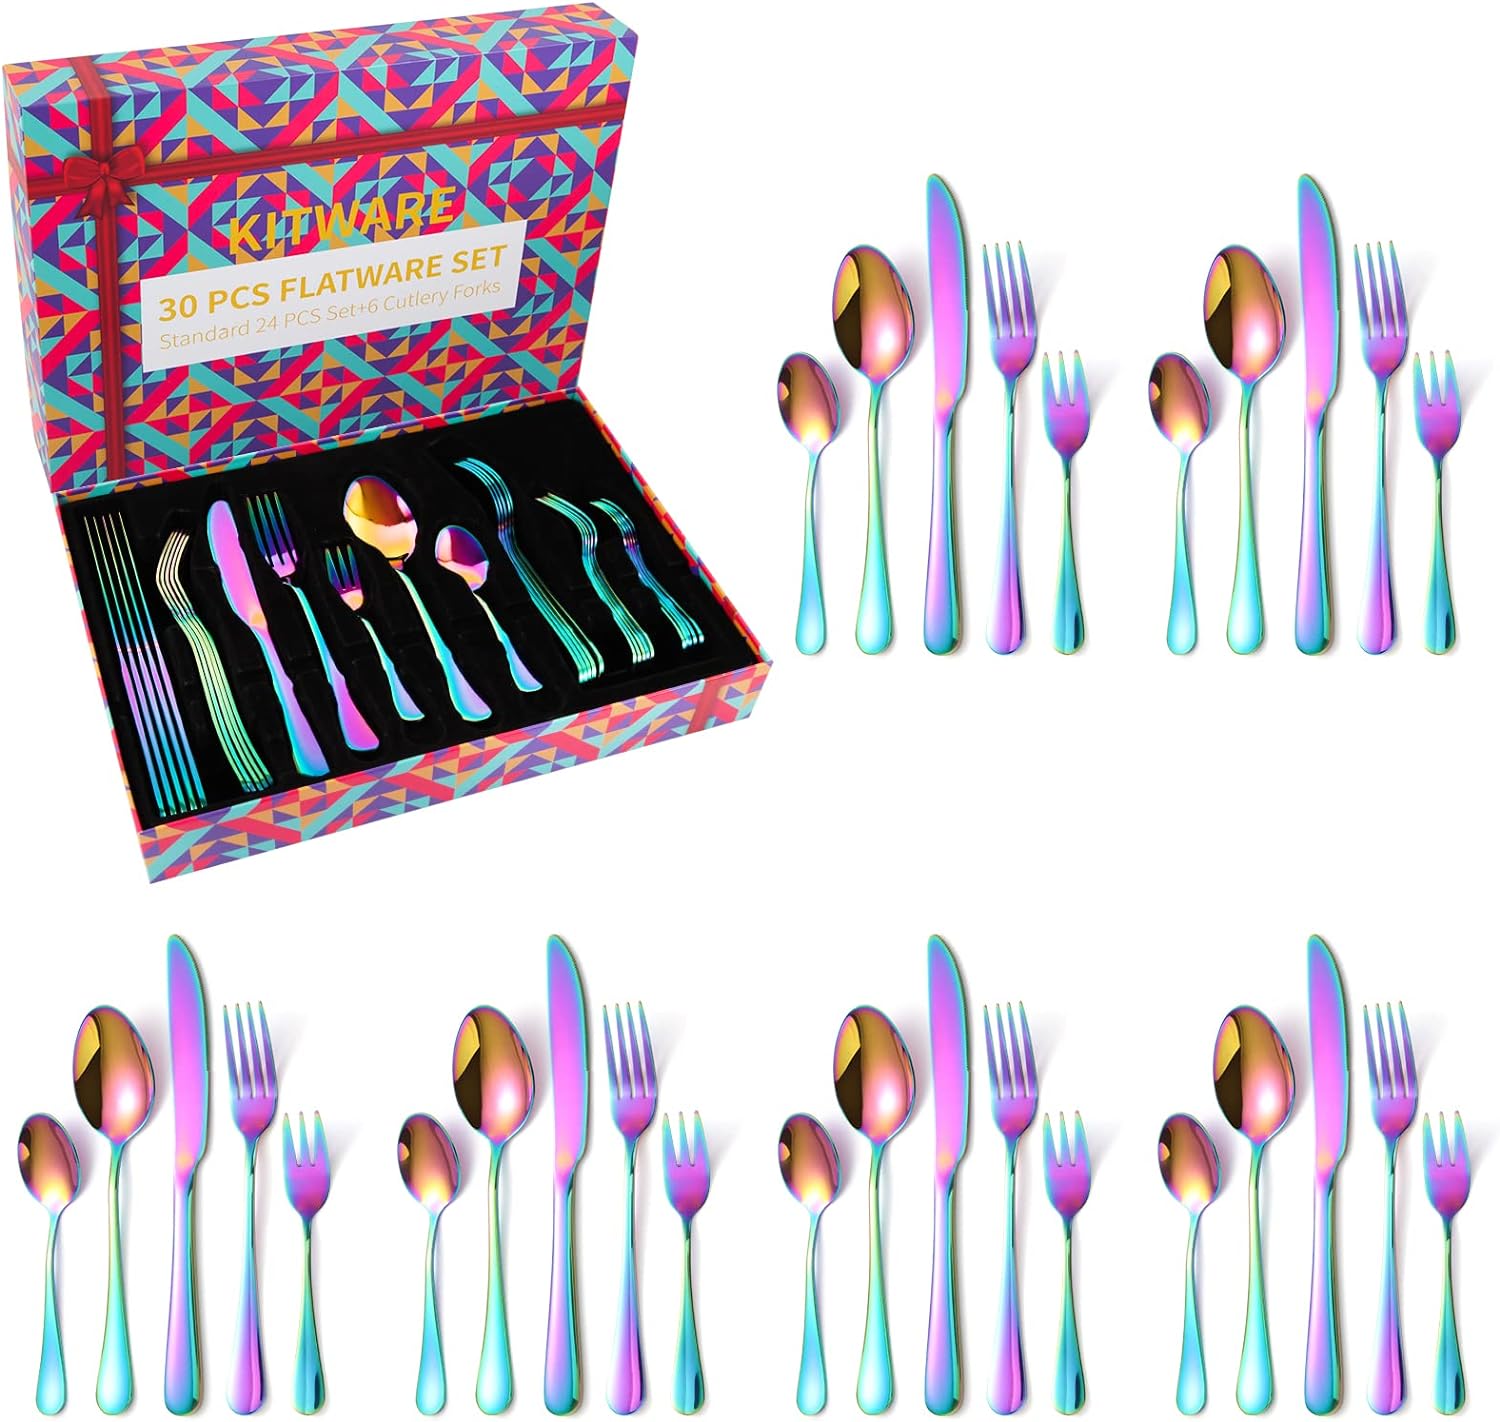 30 Piece Rainbow Silverware Set with Gift Box for 6, Colorful Stainless Steel Flatware Cutlery Set, Home Kitchen Tableware Utensil Set, Include Spoons Forks Knives